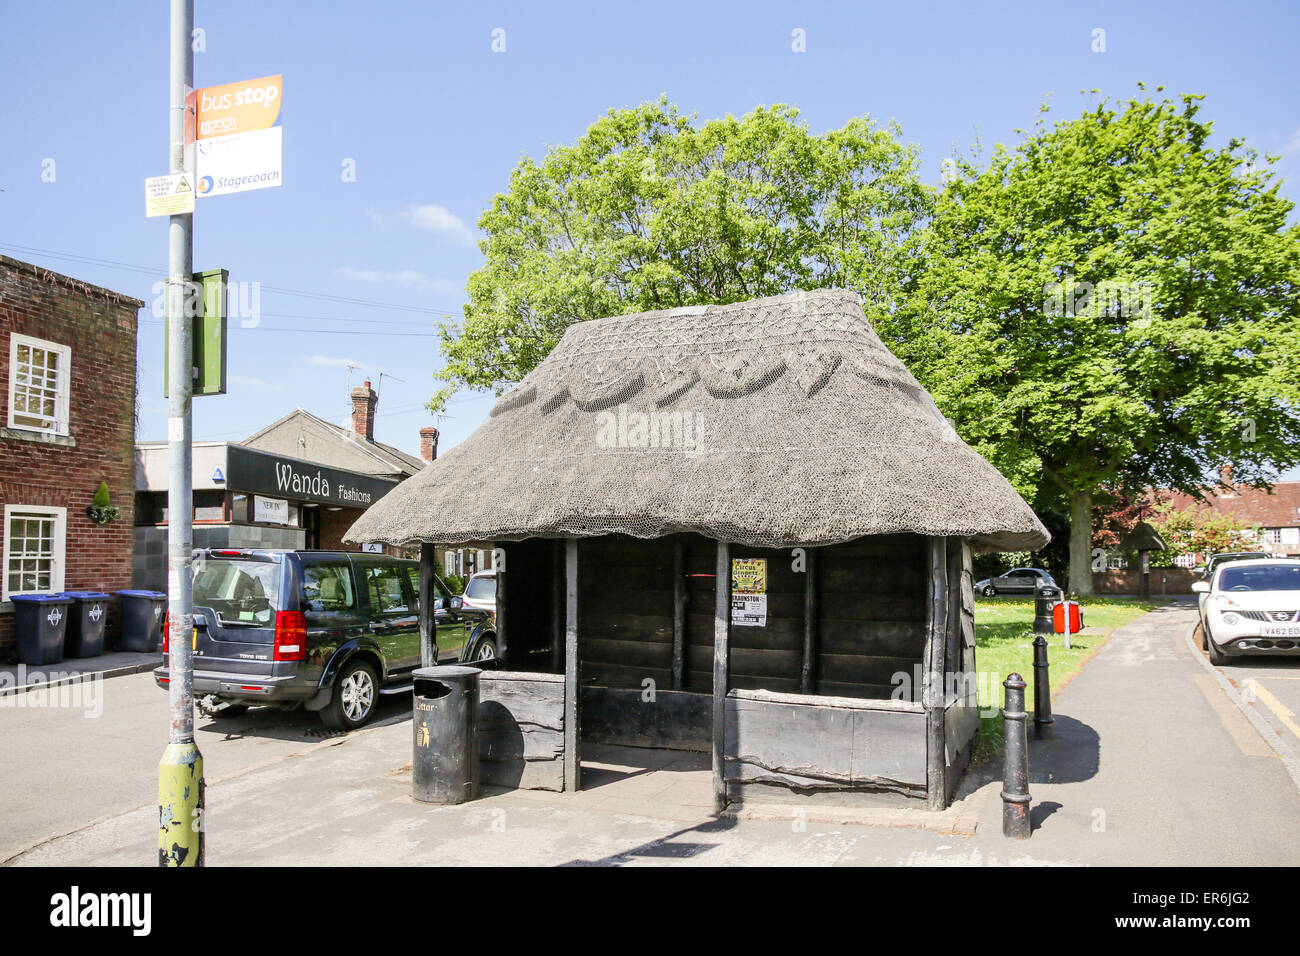 A thatched bus stop in a village location in England Stock Photo